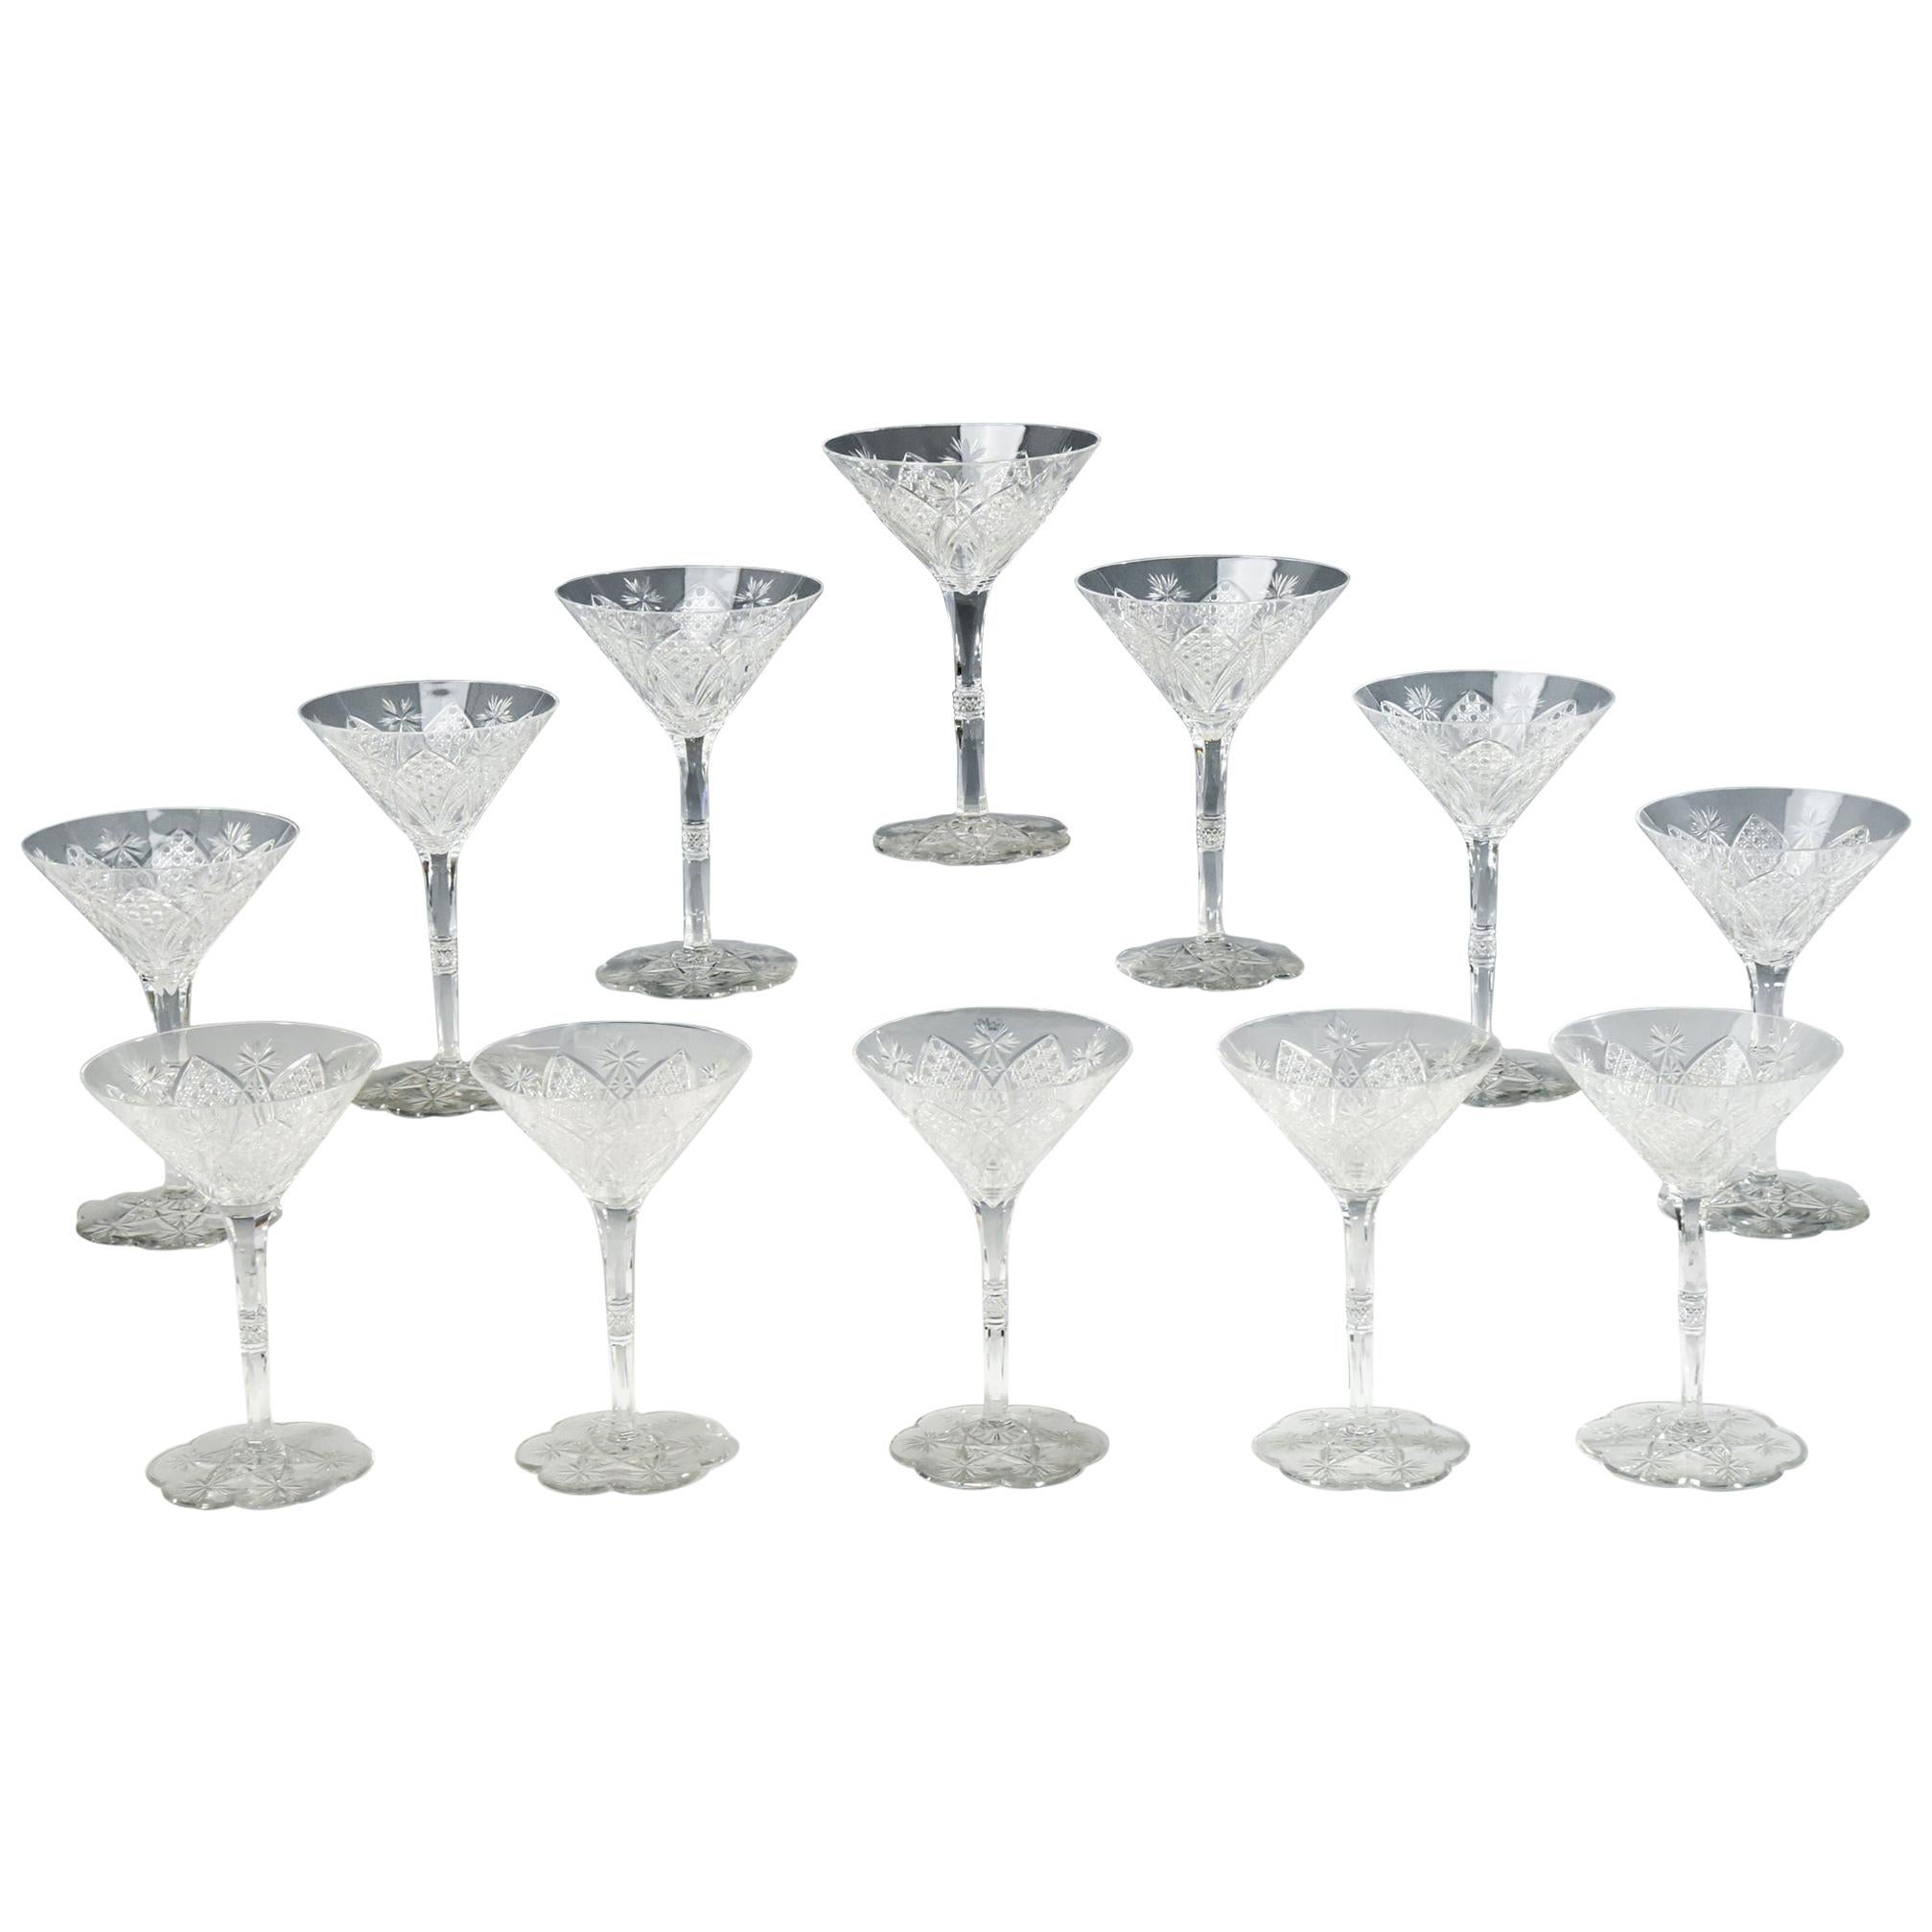 Set of 12 Baccarat Hand Blown Elbeuf Cut Crystal Martini Champagne Goblets